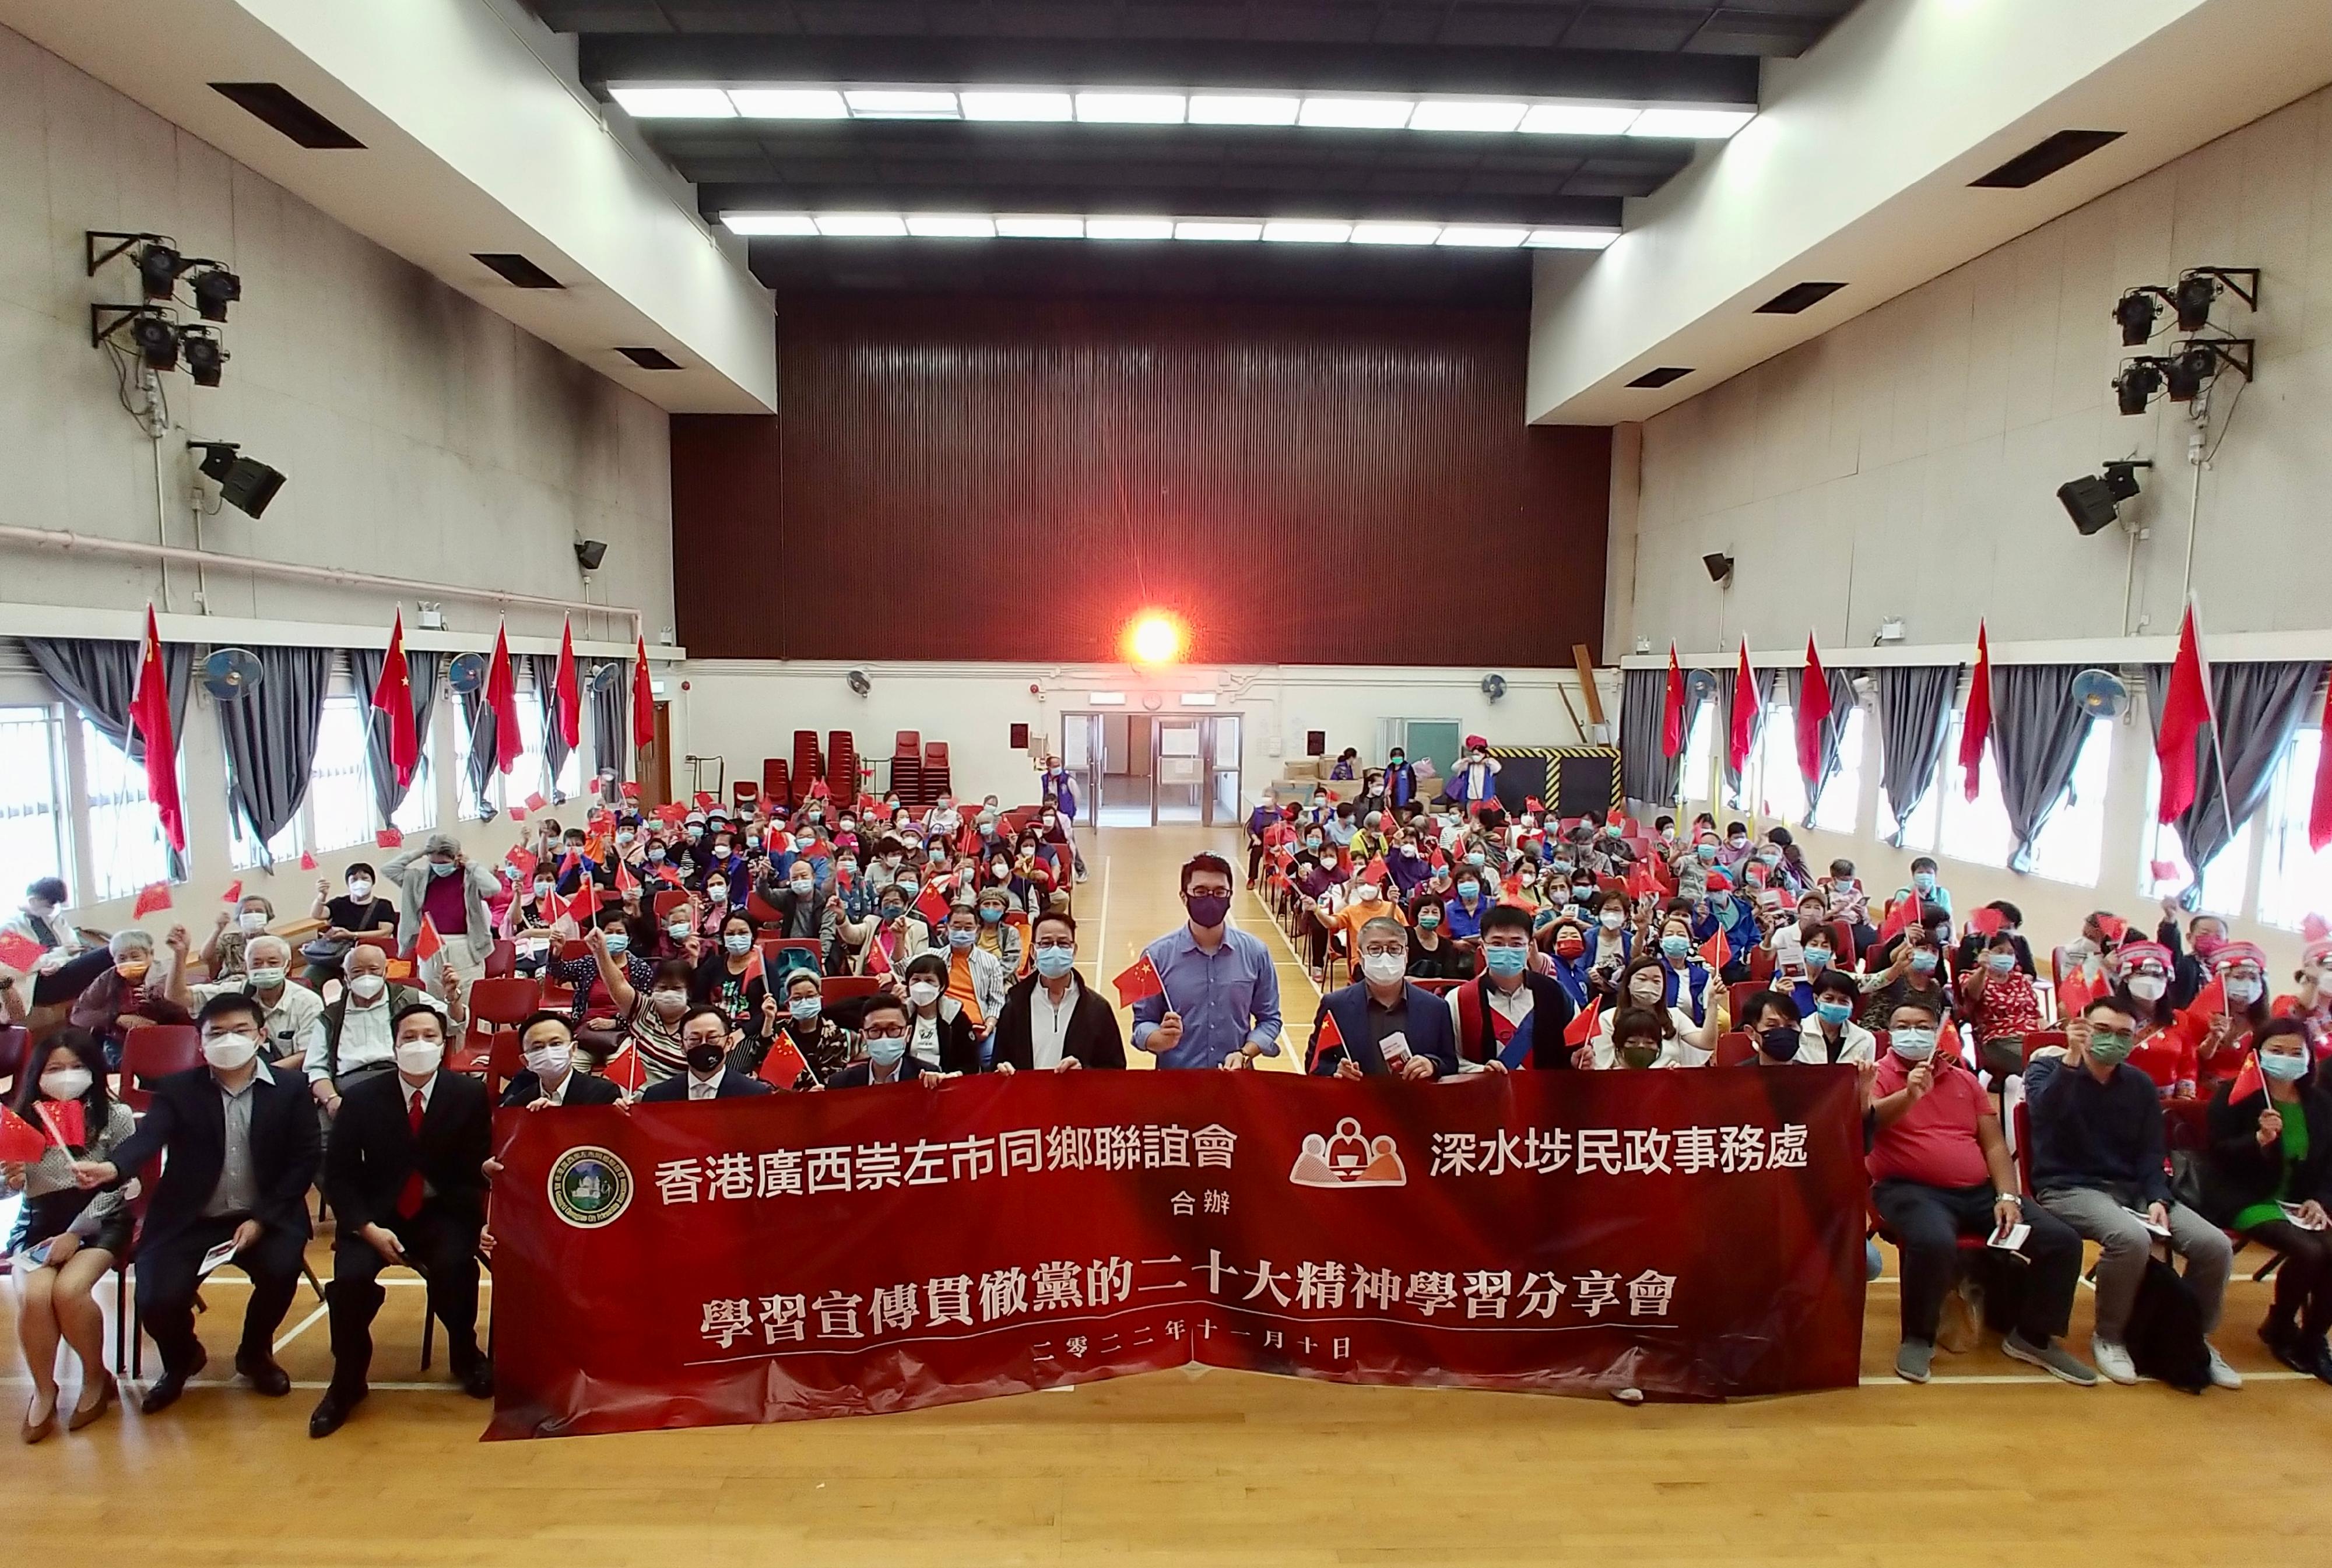 The Sham Shui Po District Office, together with the Federation of Hong Kong Guangxi Community Organisations and the Hong Kong Guangxi Kowloon West Service Centre, held a study session on "Spirit of the 20th National Congress of the Communist Party of China" at Cheung Sha Wan Community Centre yesterday (November 10). Photo shows leaders of district bodies as well as local residents at the session.